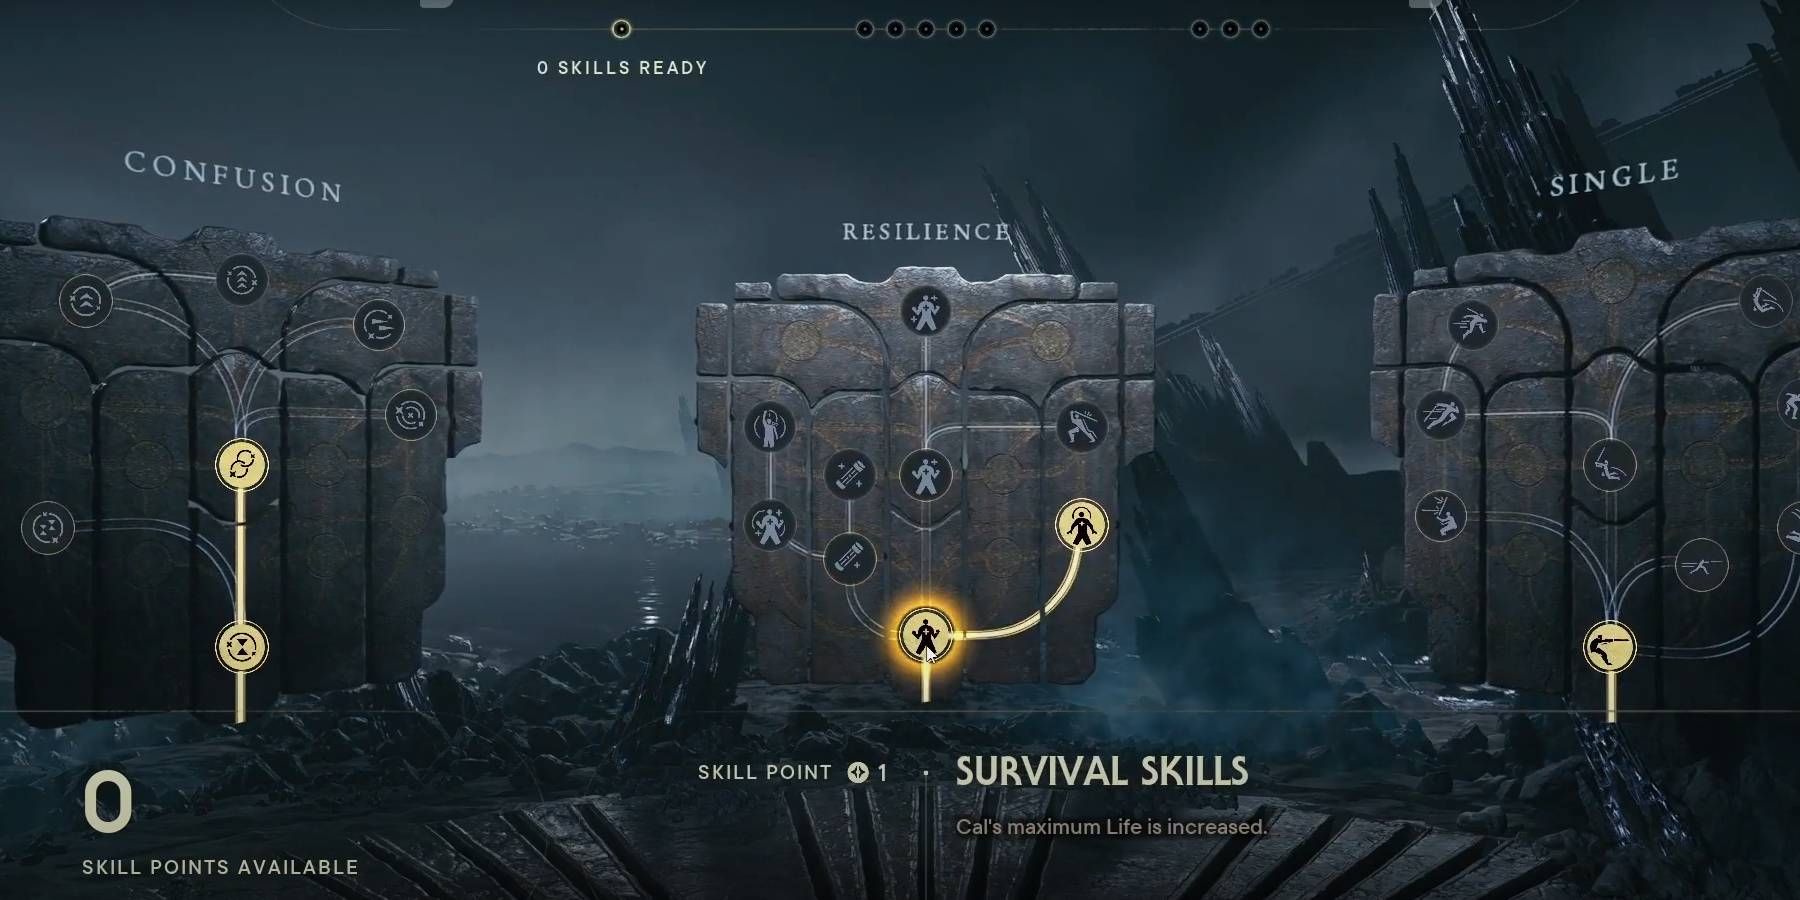 Star Wars Jedi: Survivor Resilience Skill Tree with Survival Skills Ability Selected to Increase Max Health